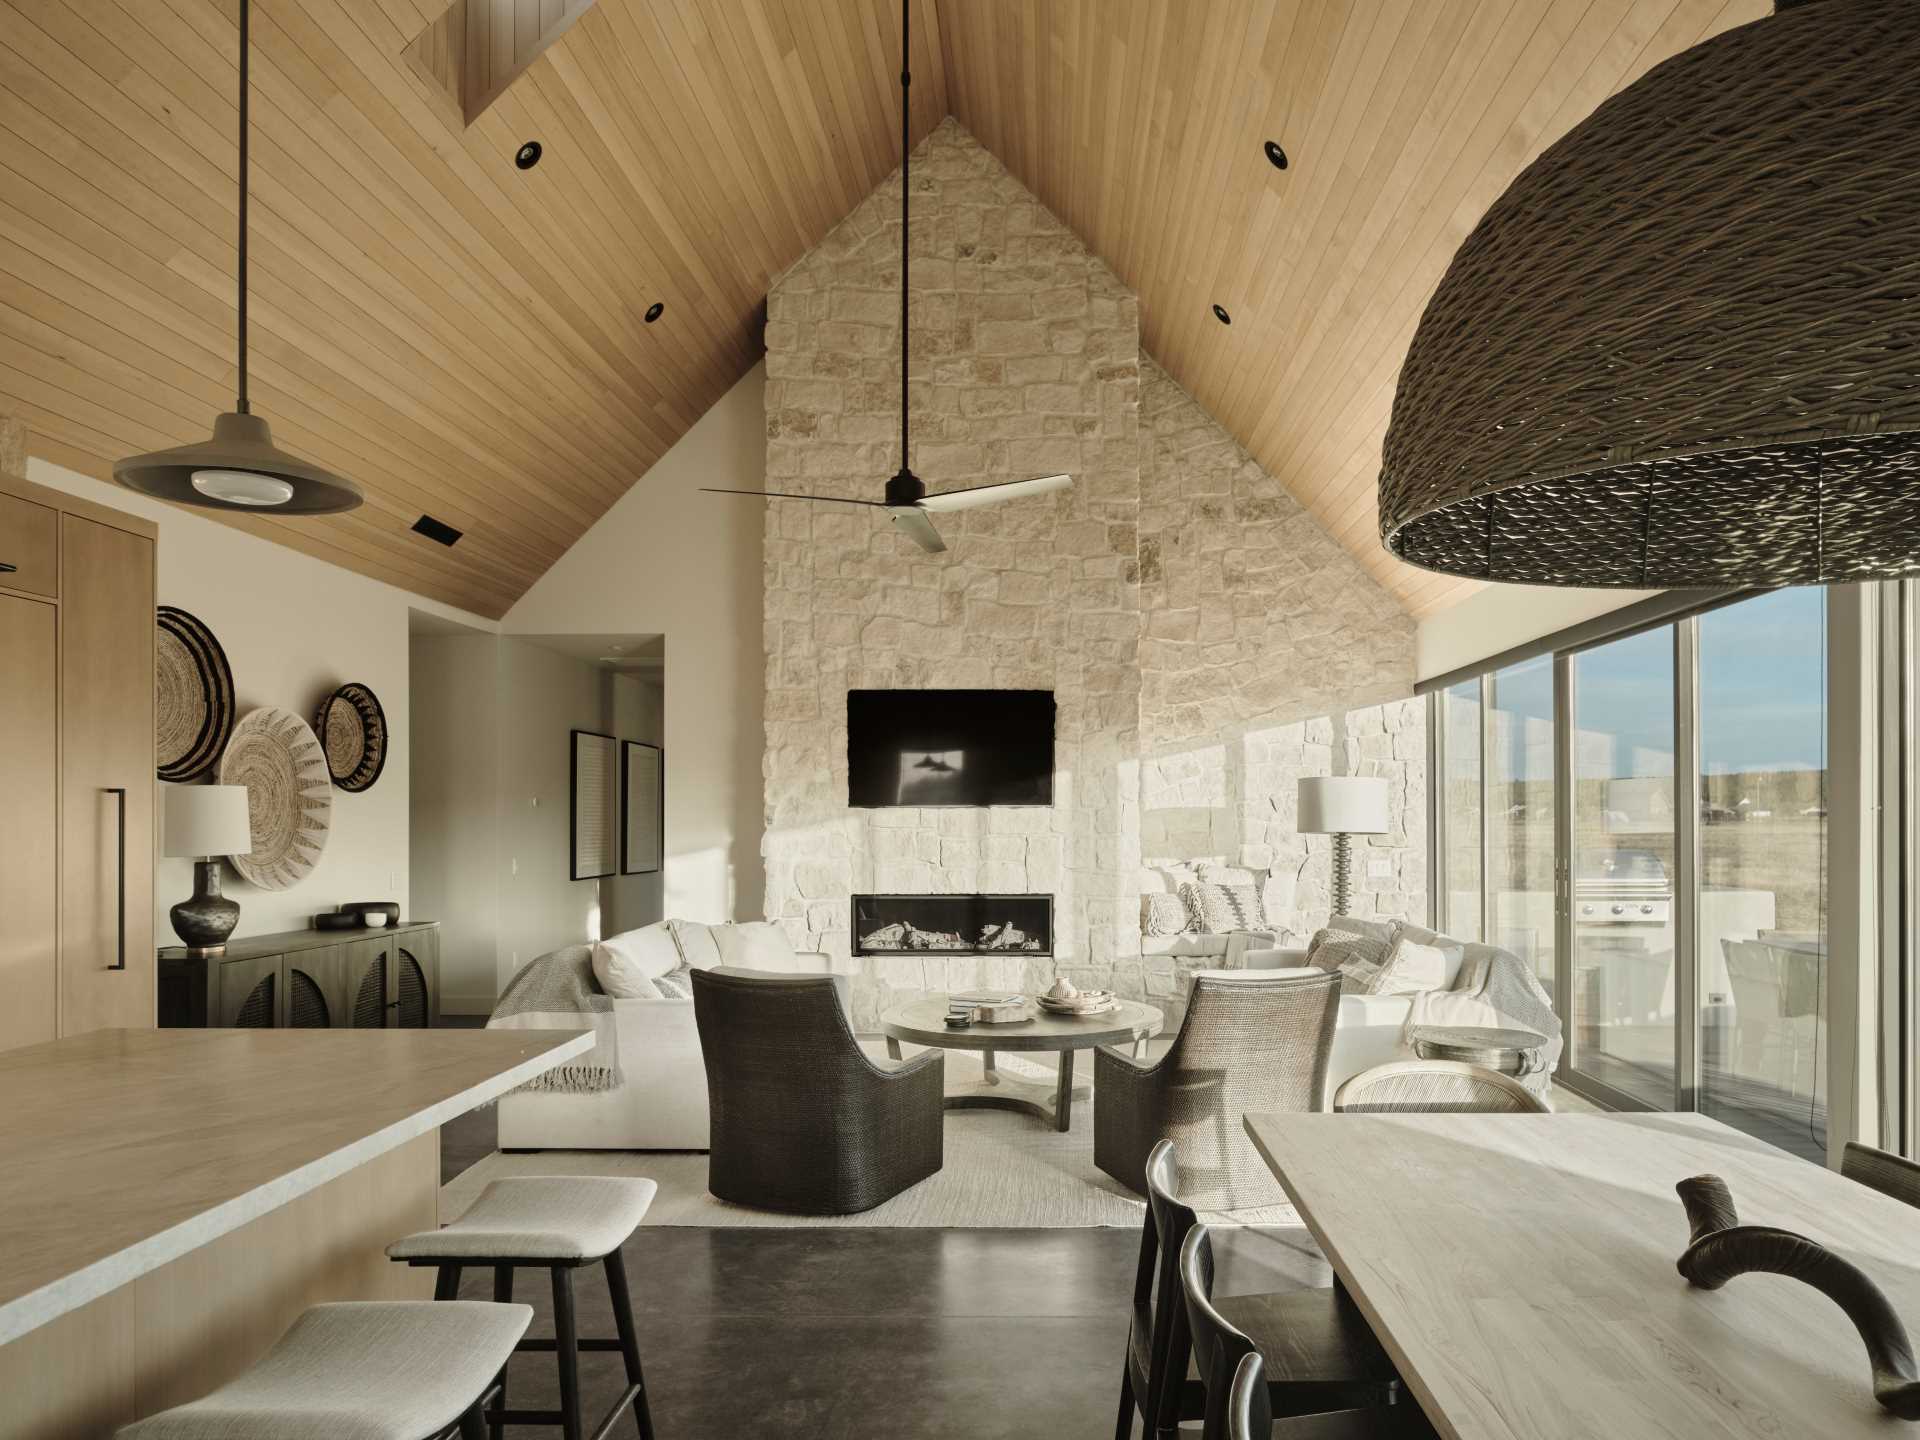 The interior of the home is a strong contrast to the exterior, with the stone fireplace in the living room drawing the eye upward to the wood-lined ceiling.